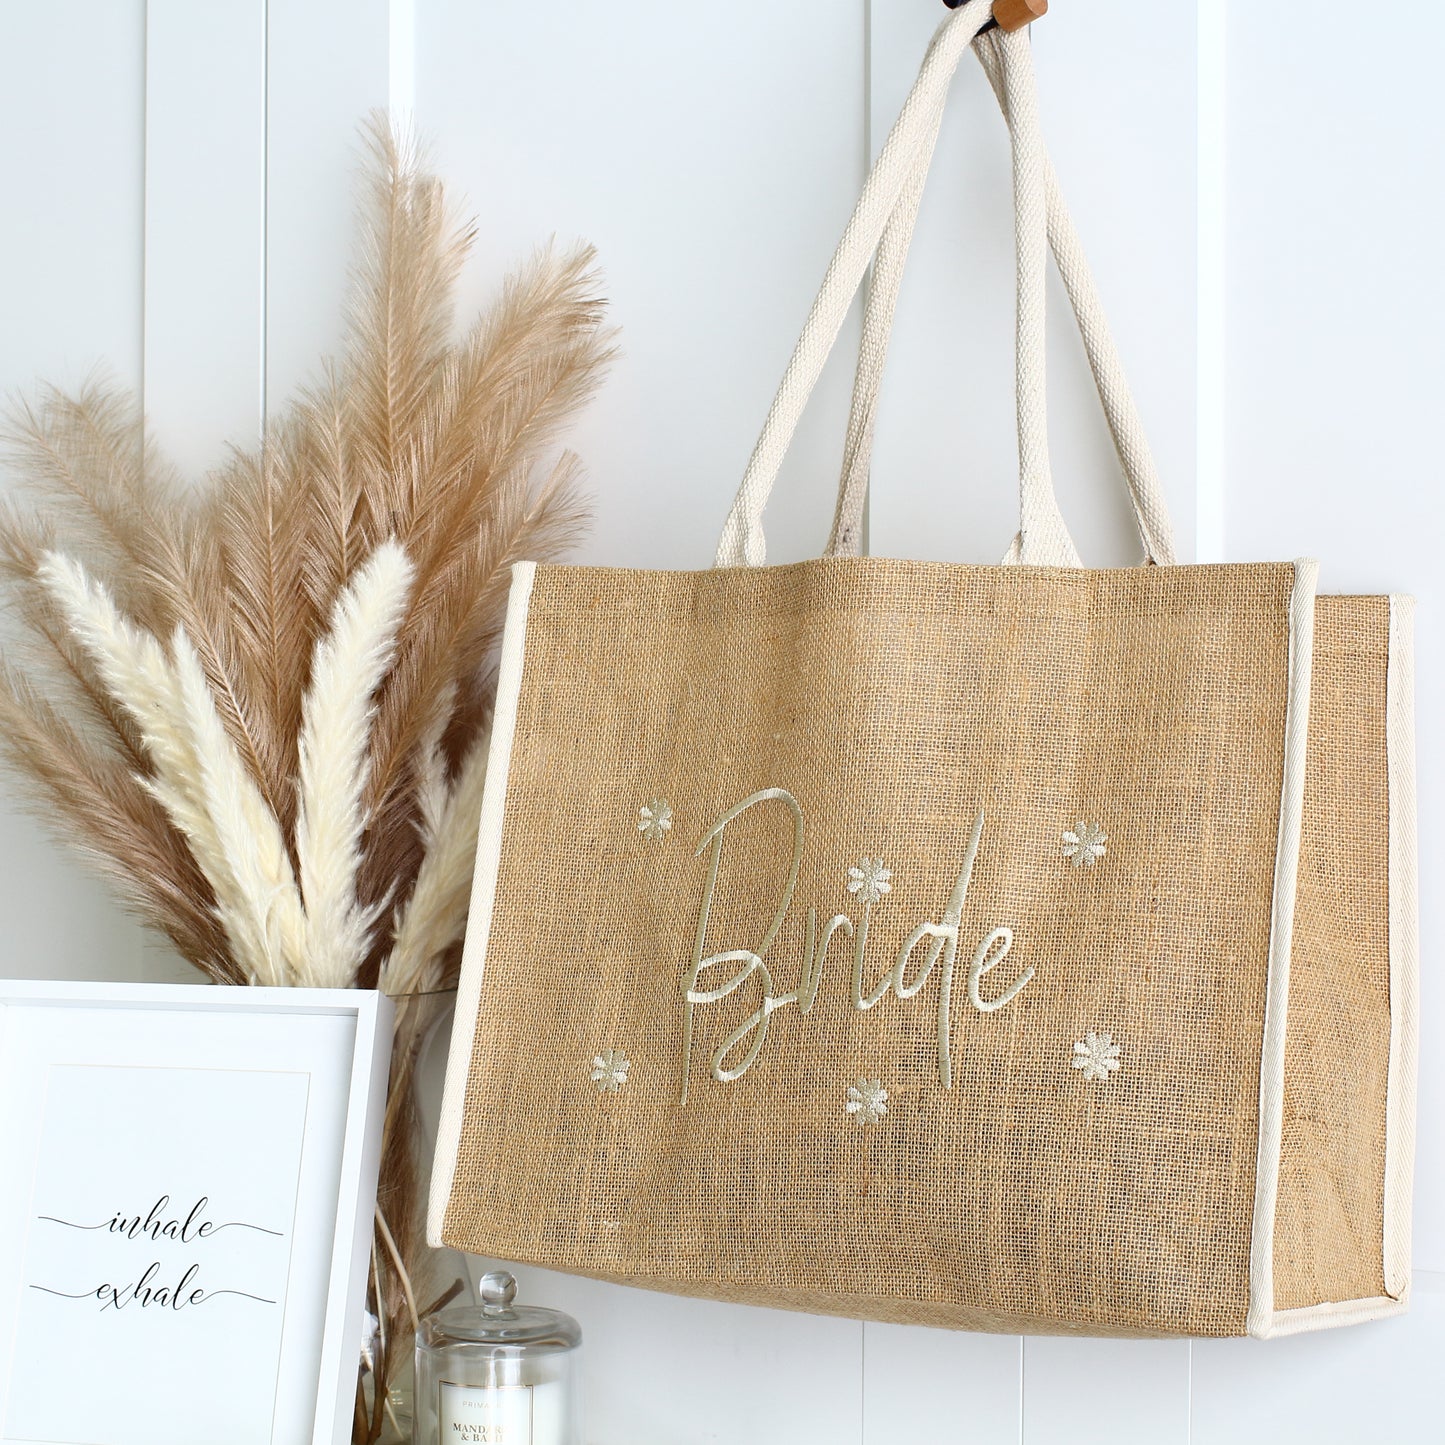 NEW - Embroidered Bride Daisy tote Bag